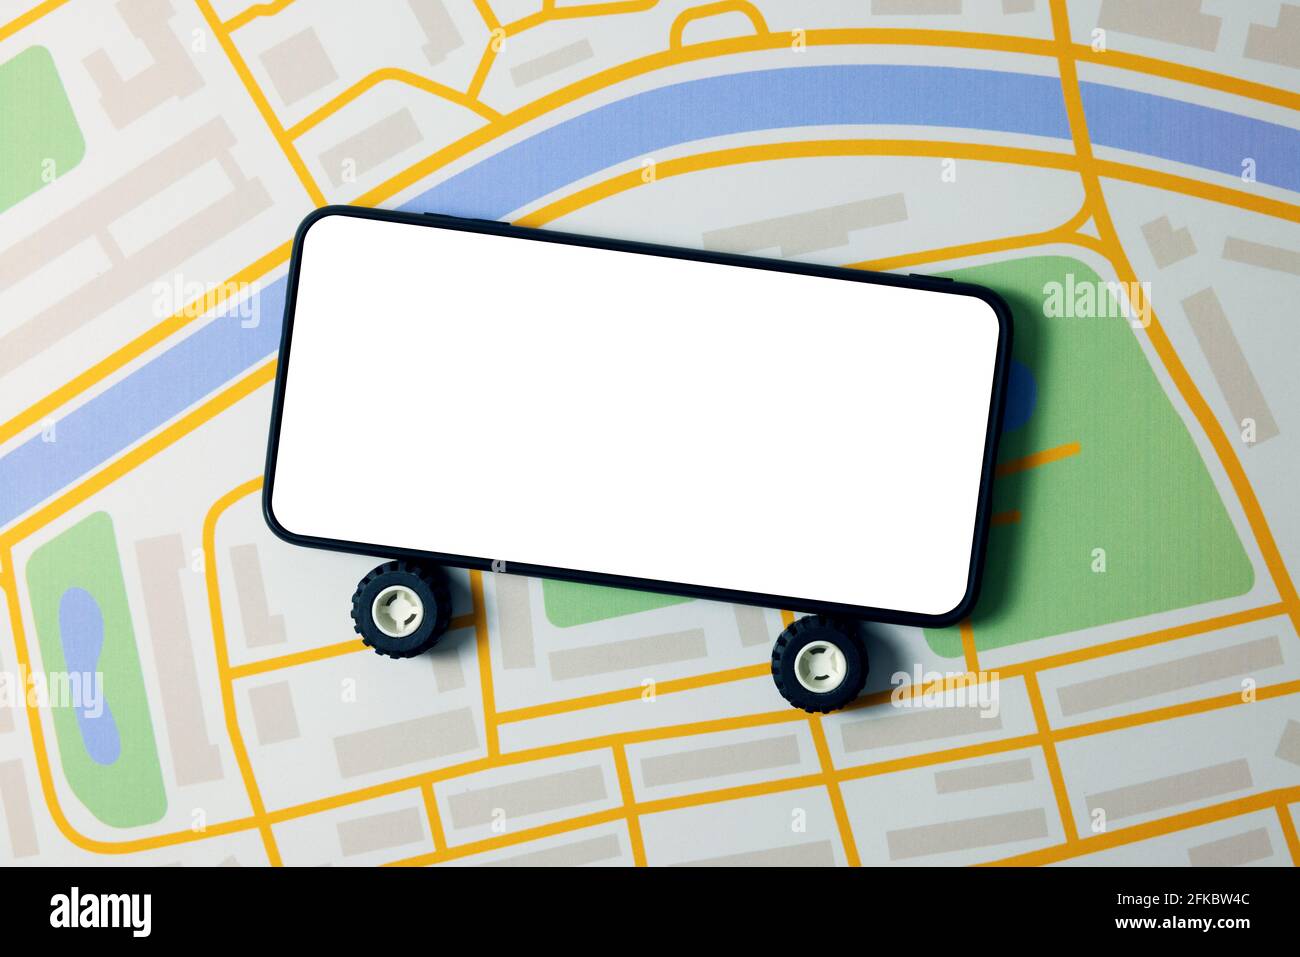 carsharing, car rental and taxi service mobile app - phone with wheels and blank screen on city map Stock Photo